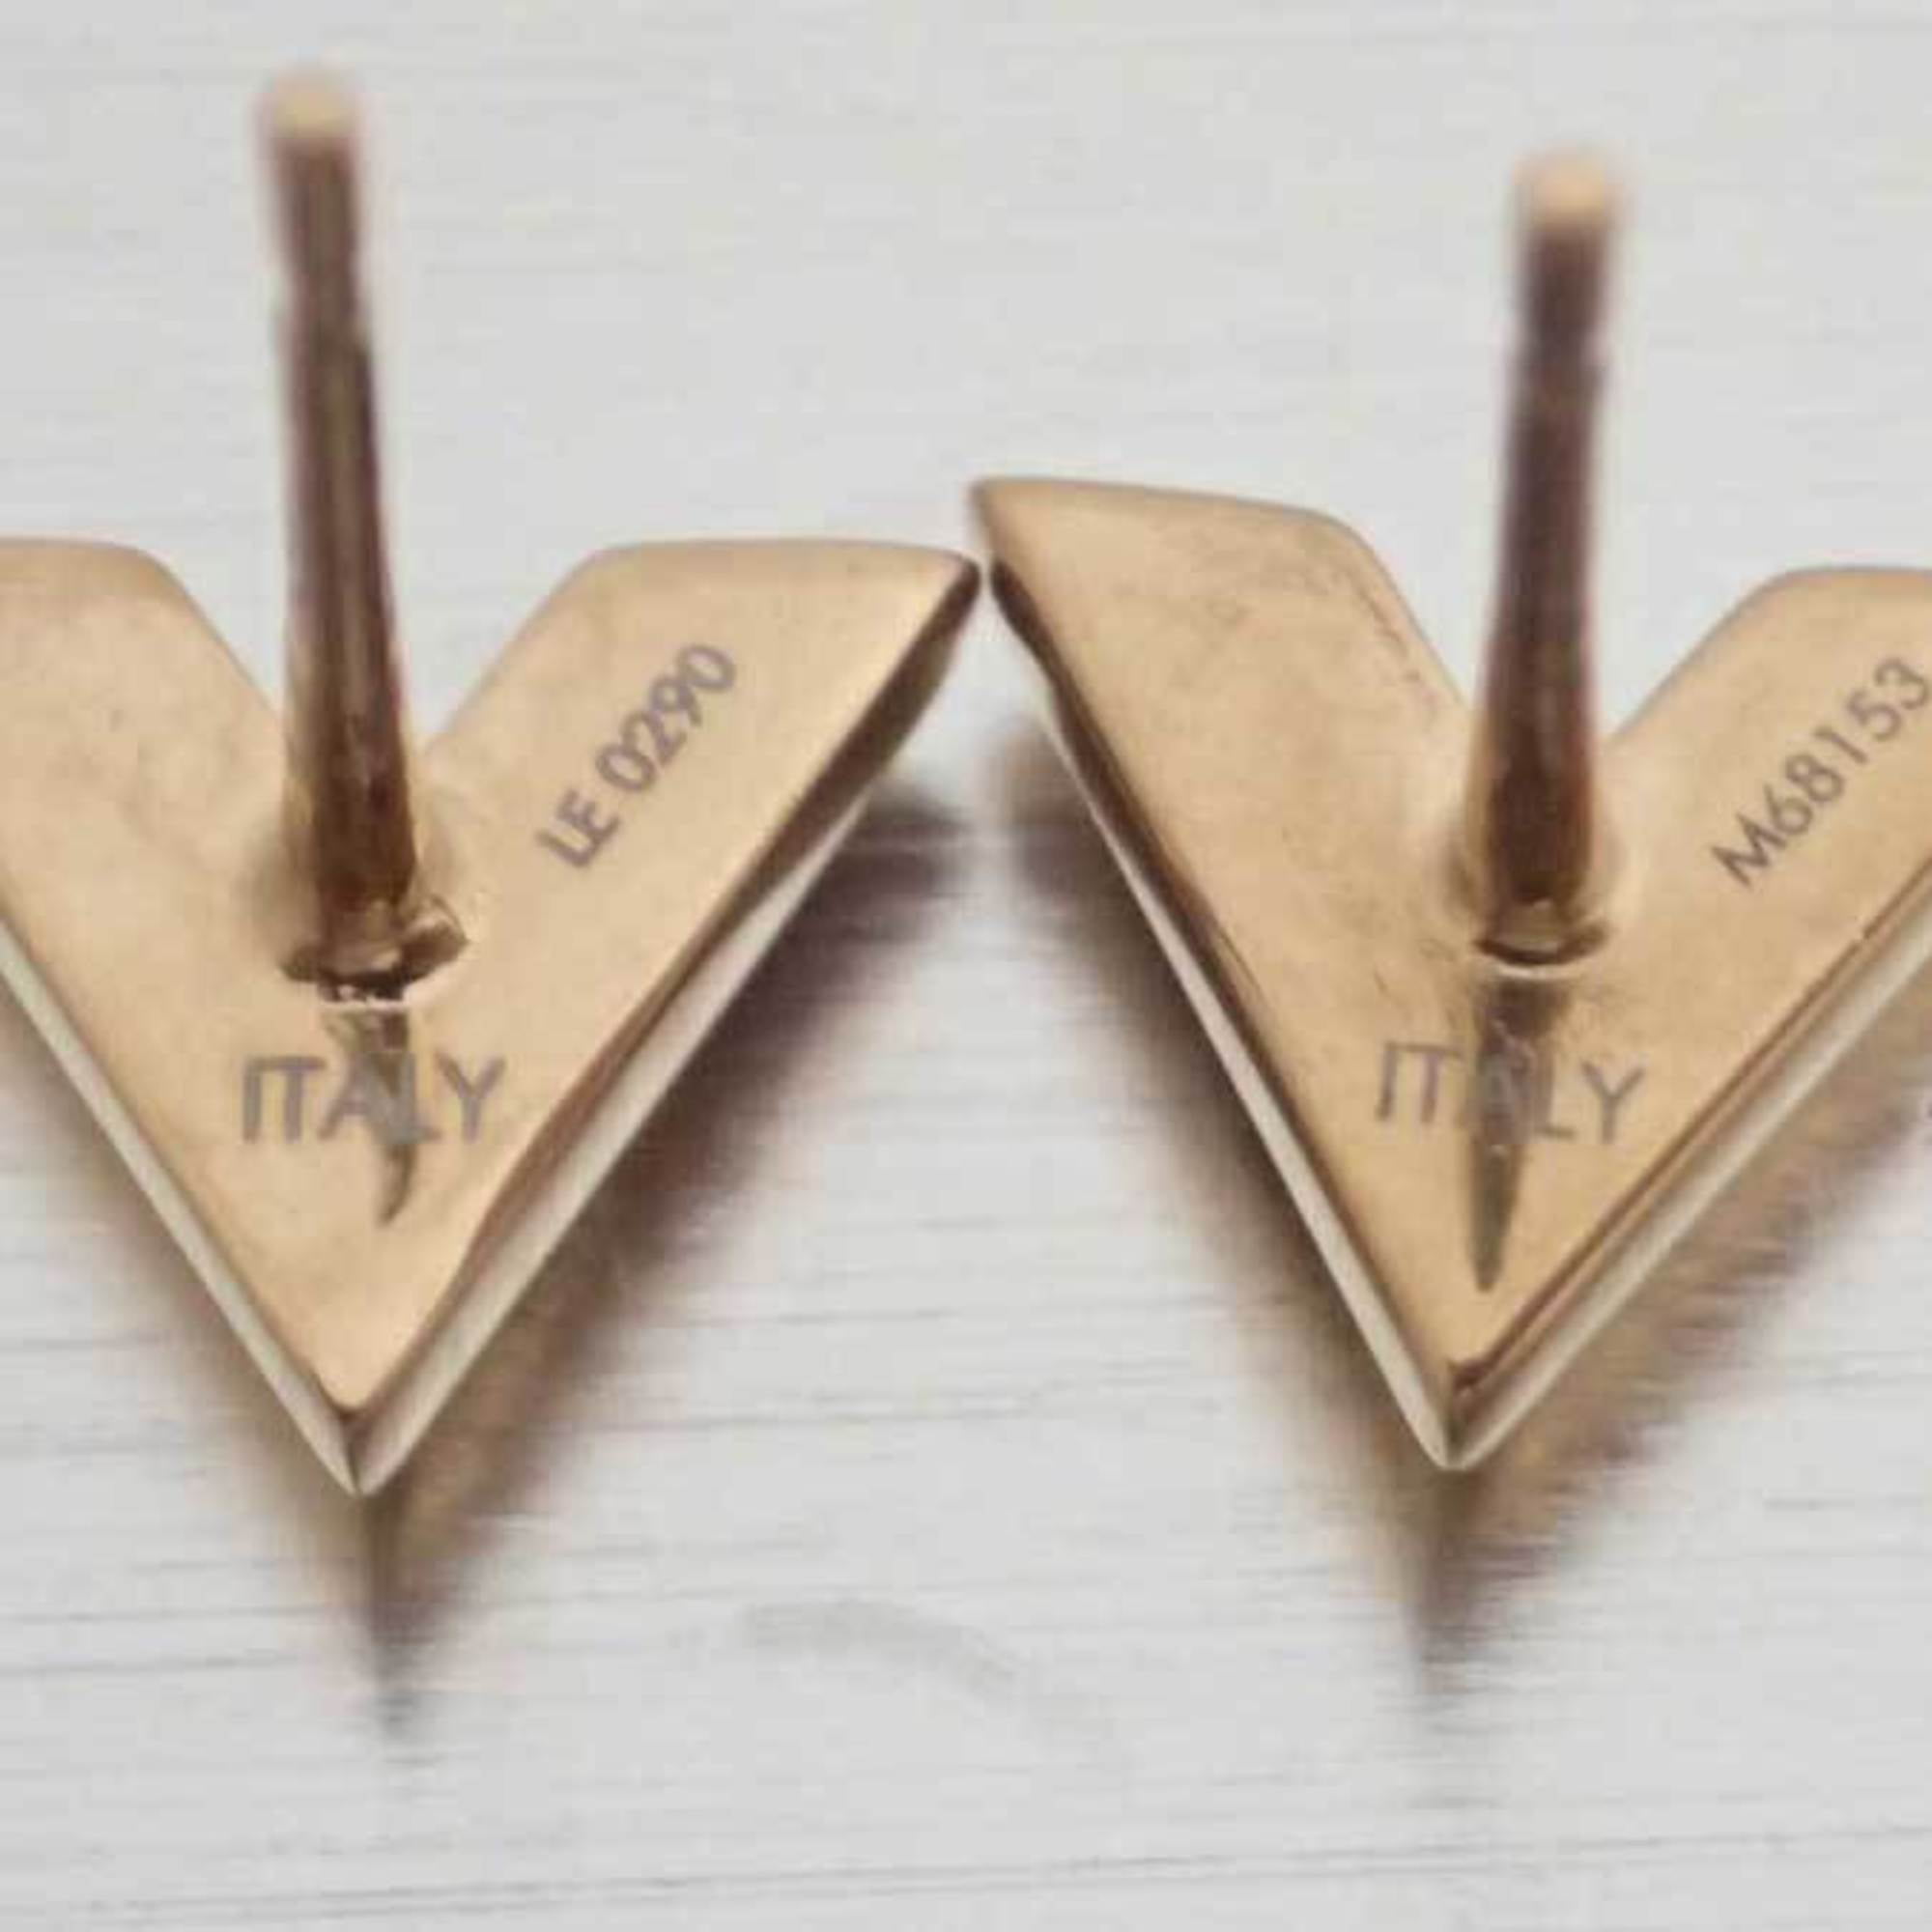 LOUIS VUITTON LOUIS VUITTON Essential V Piercings Gold Plated Used Earrings  Women LV M68513｜Product Code：2100301096714｜BRAND OFF Online Store